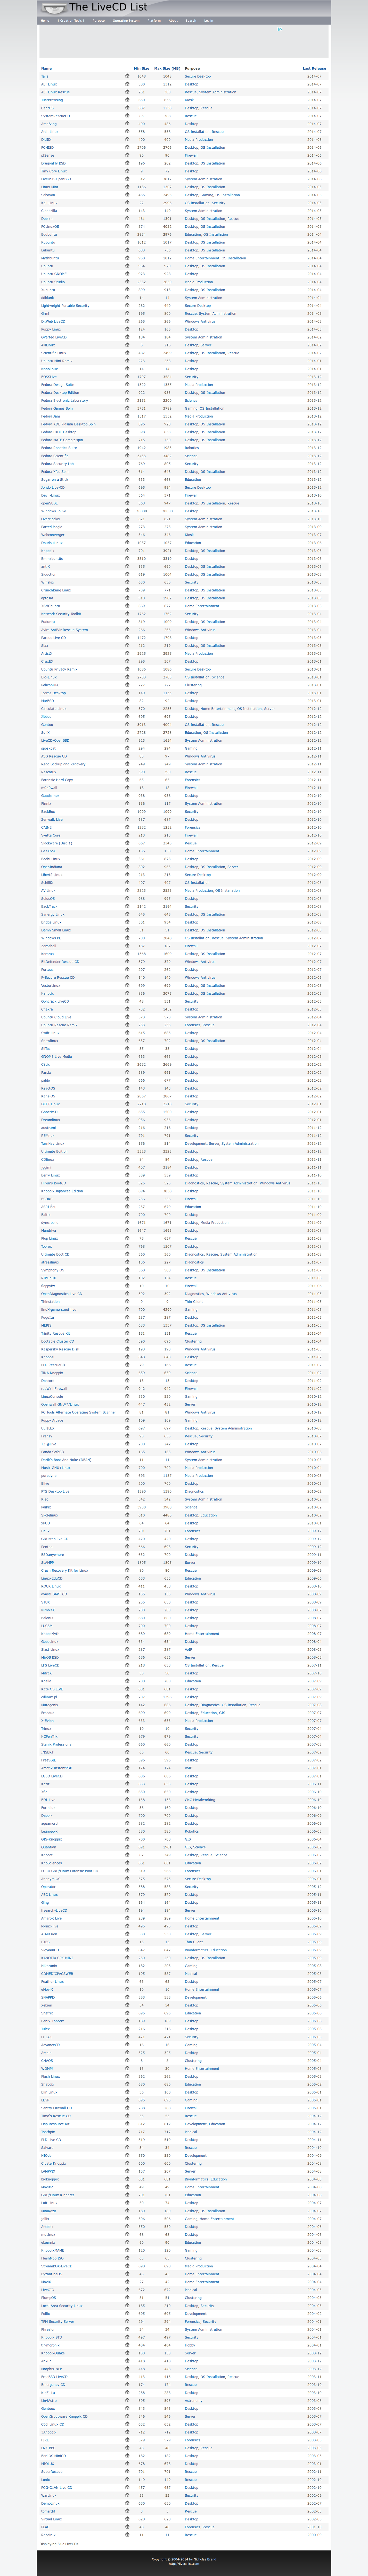 The_LiveCD_List_-_2014-08-02_02.45.08.png